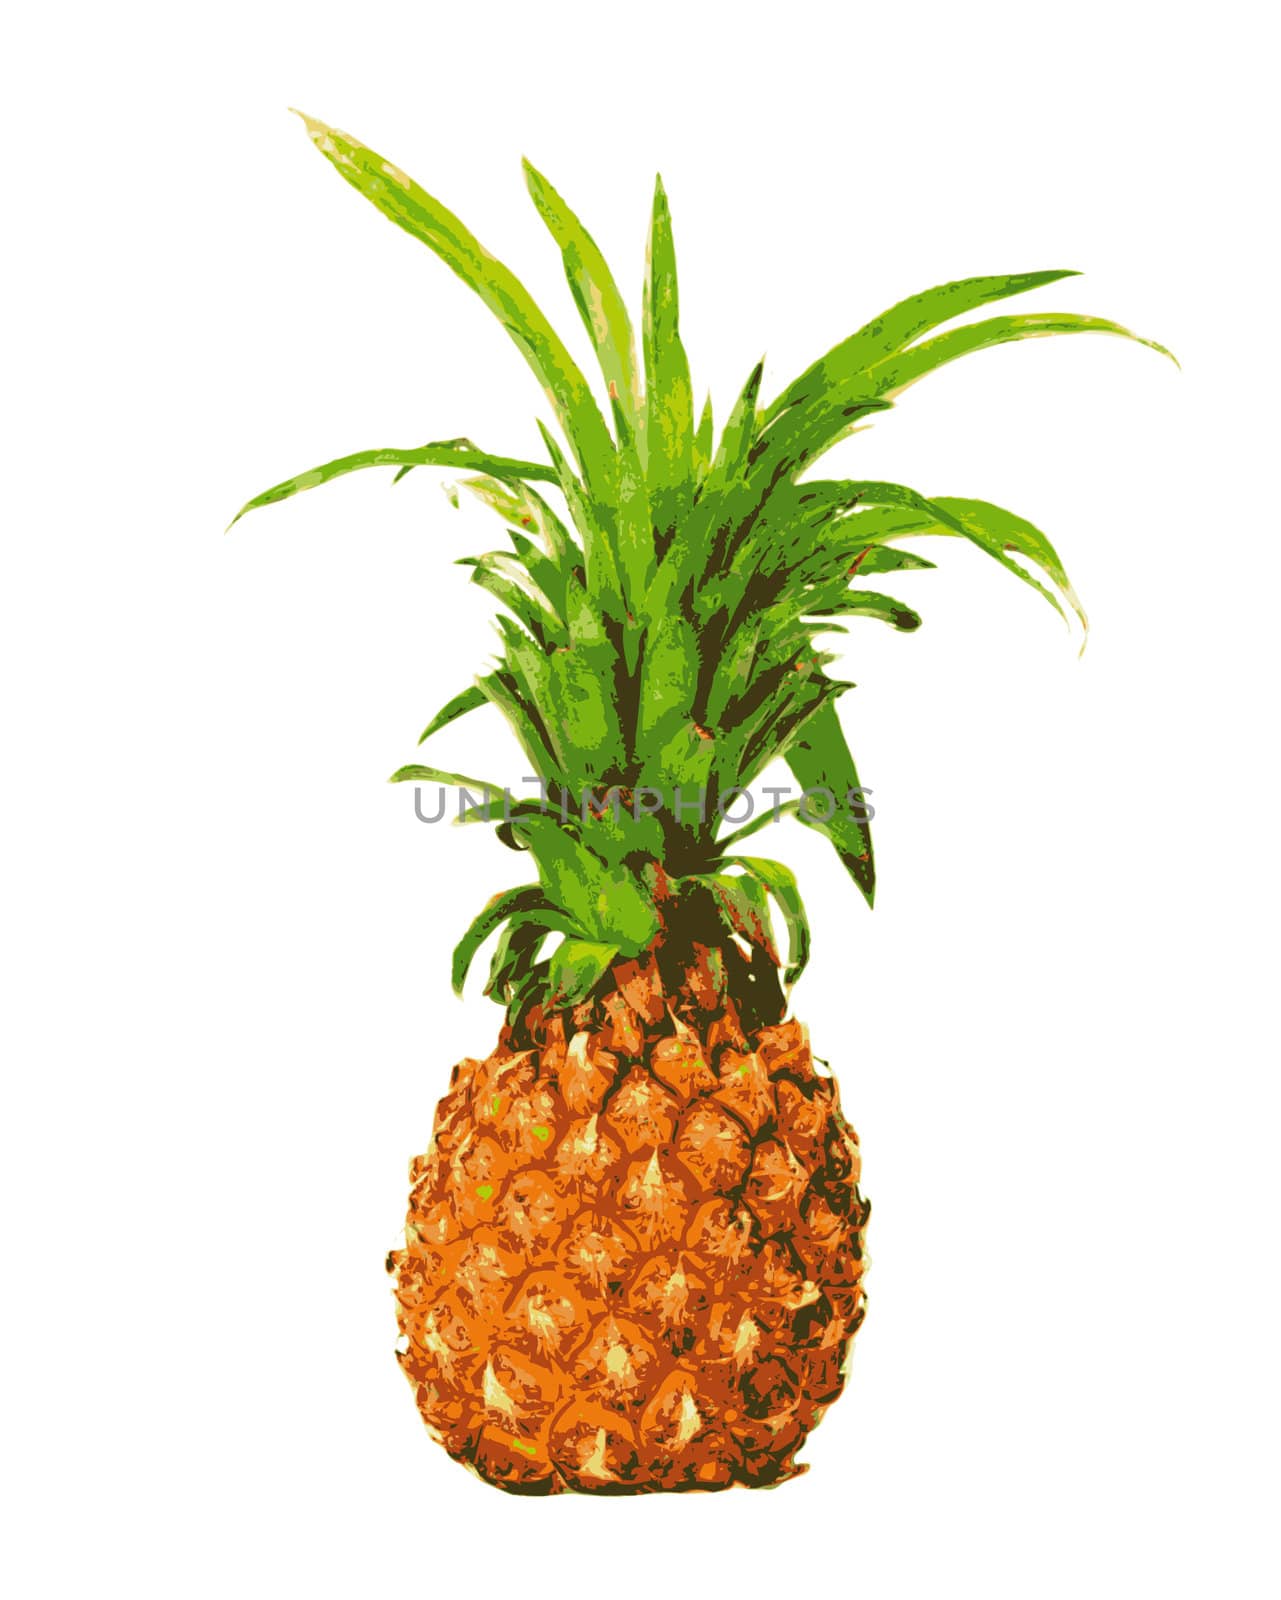 Pineapple on a white background  by schankz